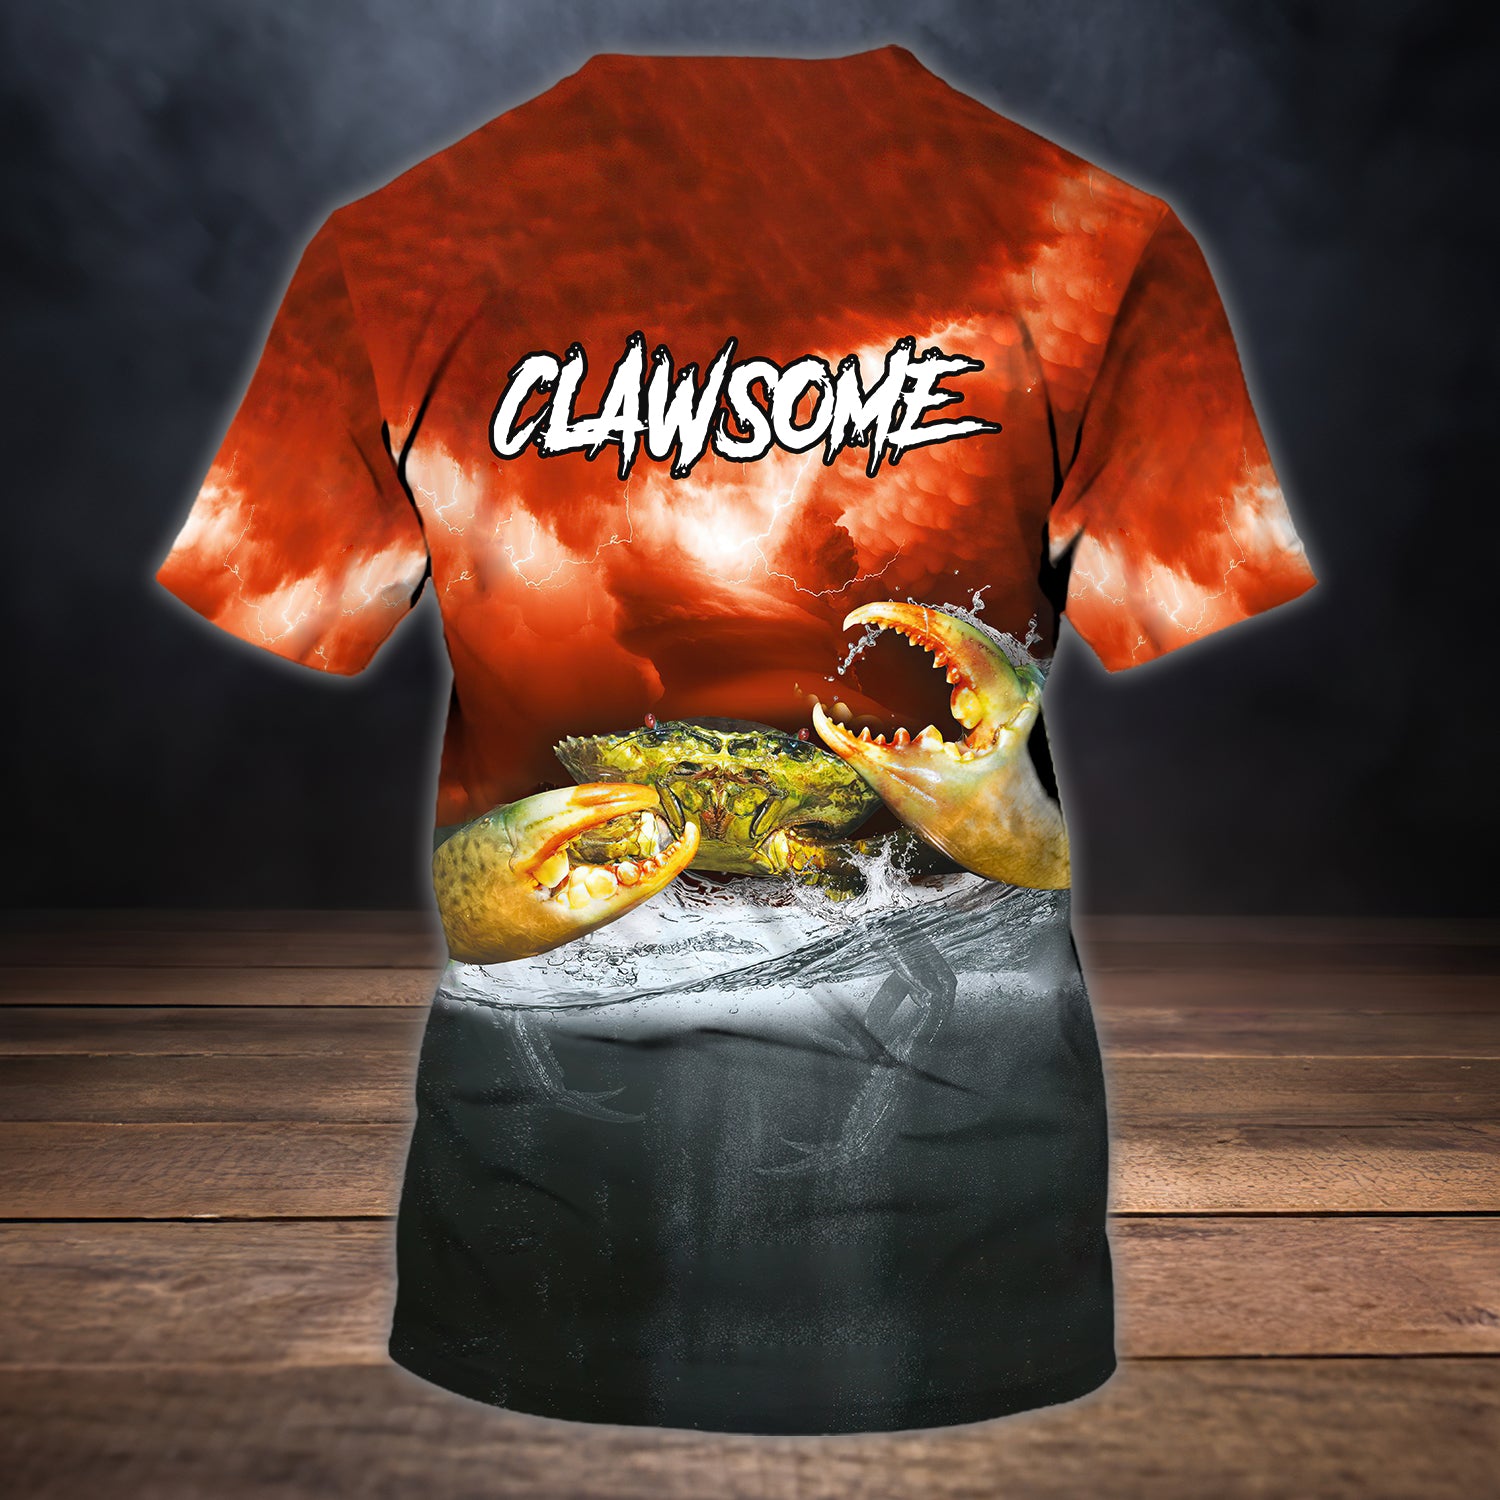 Clawsome Personalized Name 3D T Shirt 194, Nvc97